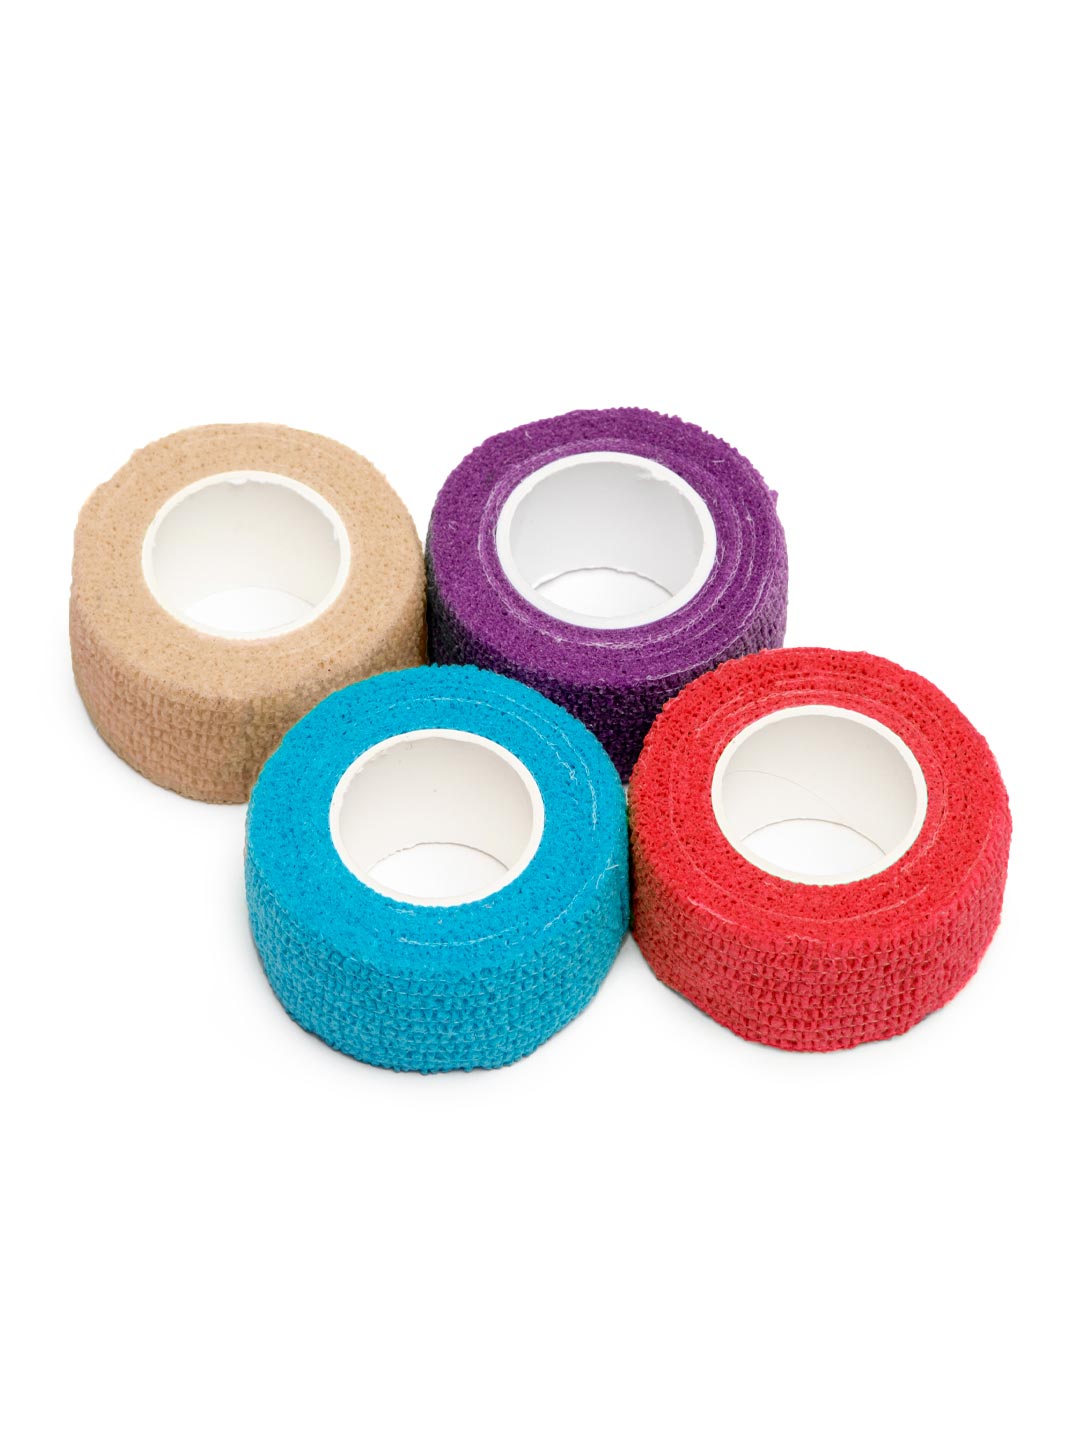 Four rolls of athletic tape, nude, purple, sky blue and red.